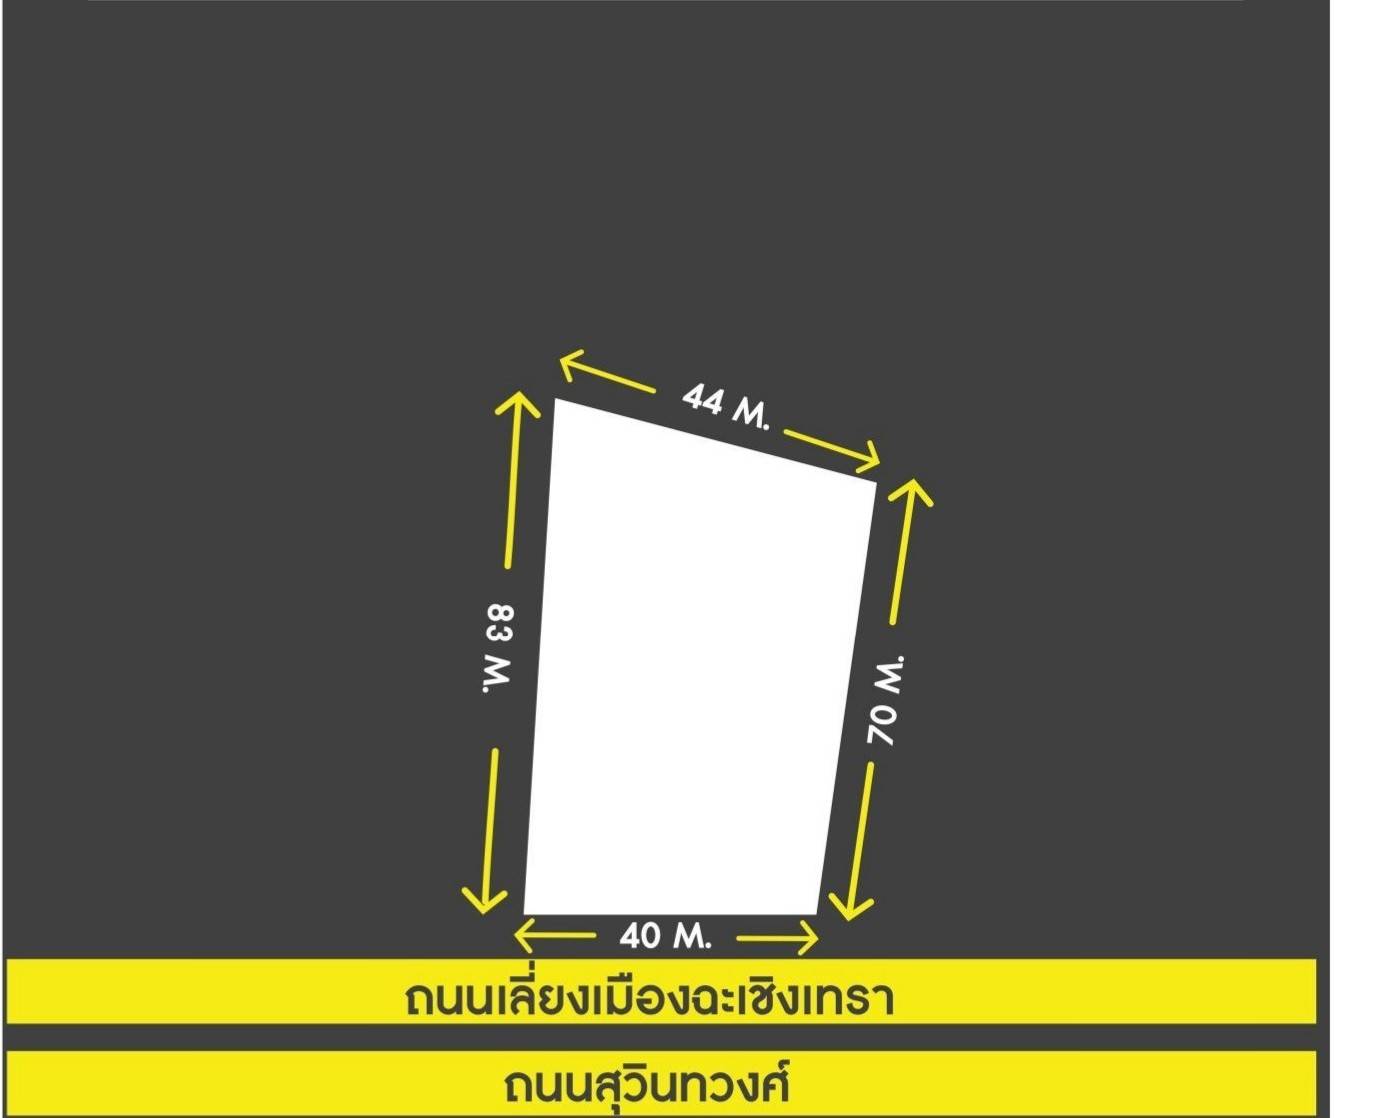 Land and Building for sale Suwinthawong Road 365 Chachoengsao Province